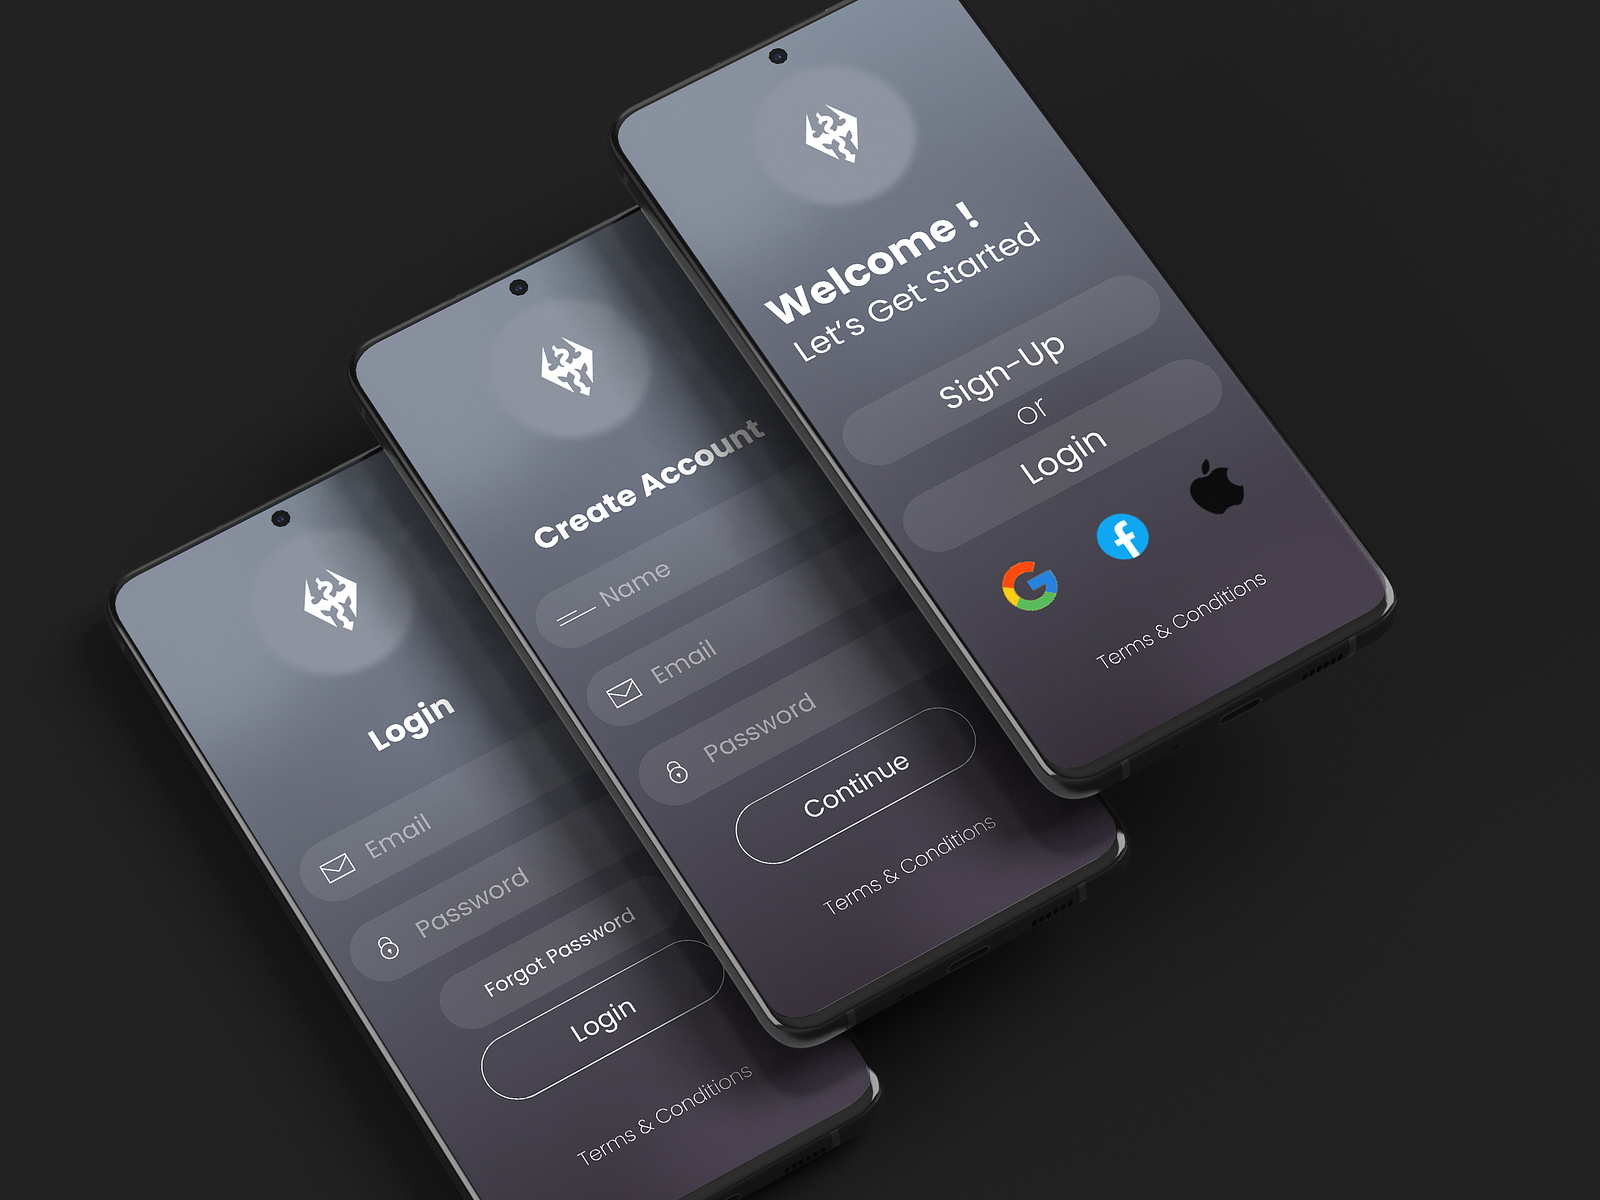 Sign up Screen of an App UI Design by Shan Ghumman on Dribbble